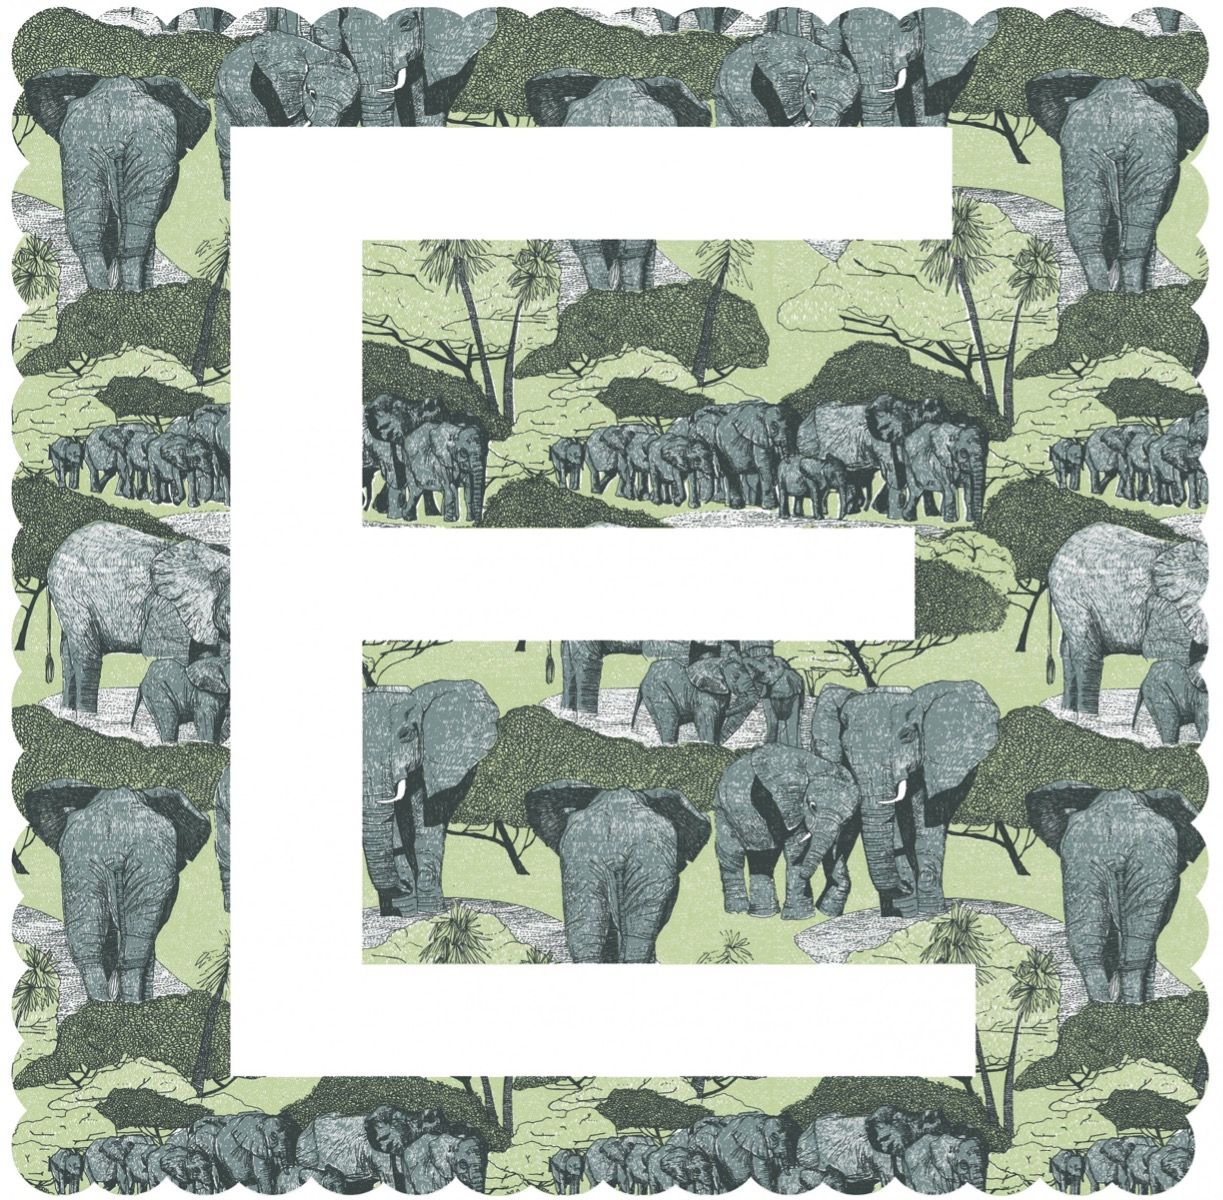 E is for Elephant by Clare Halifax